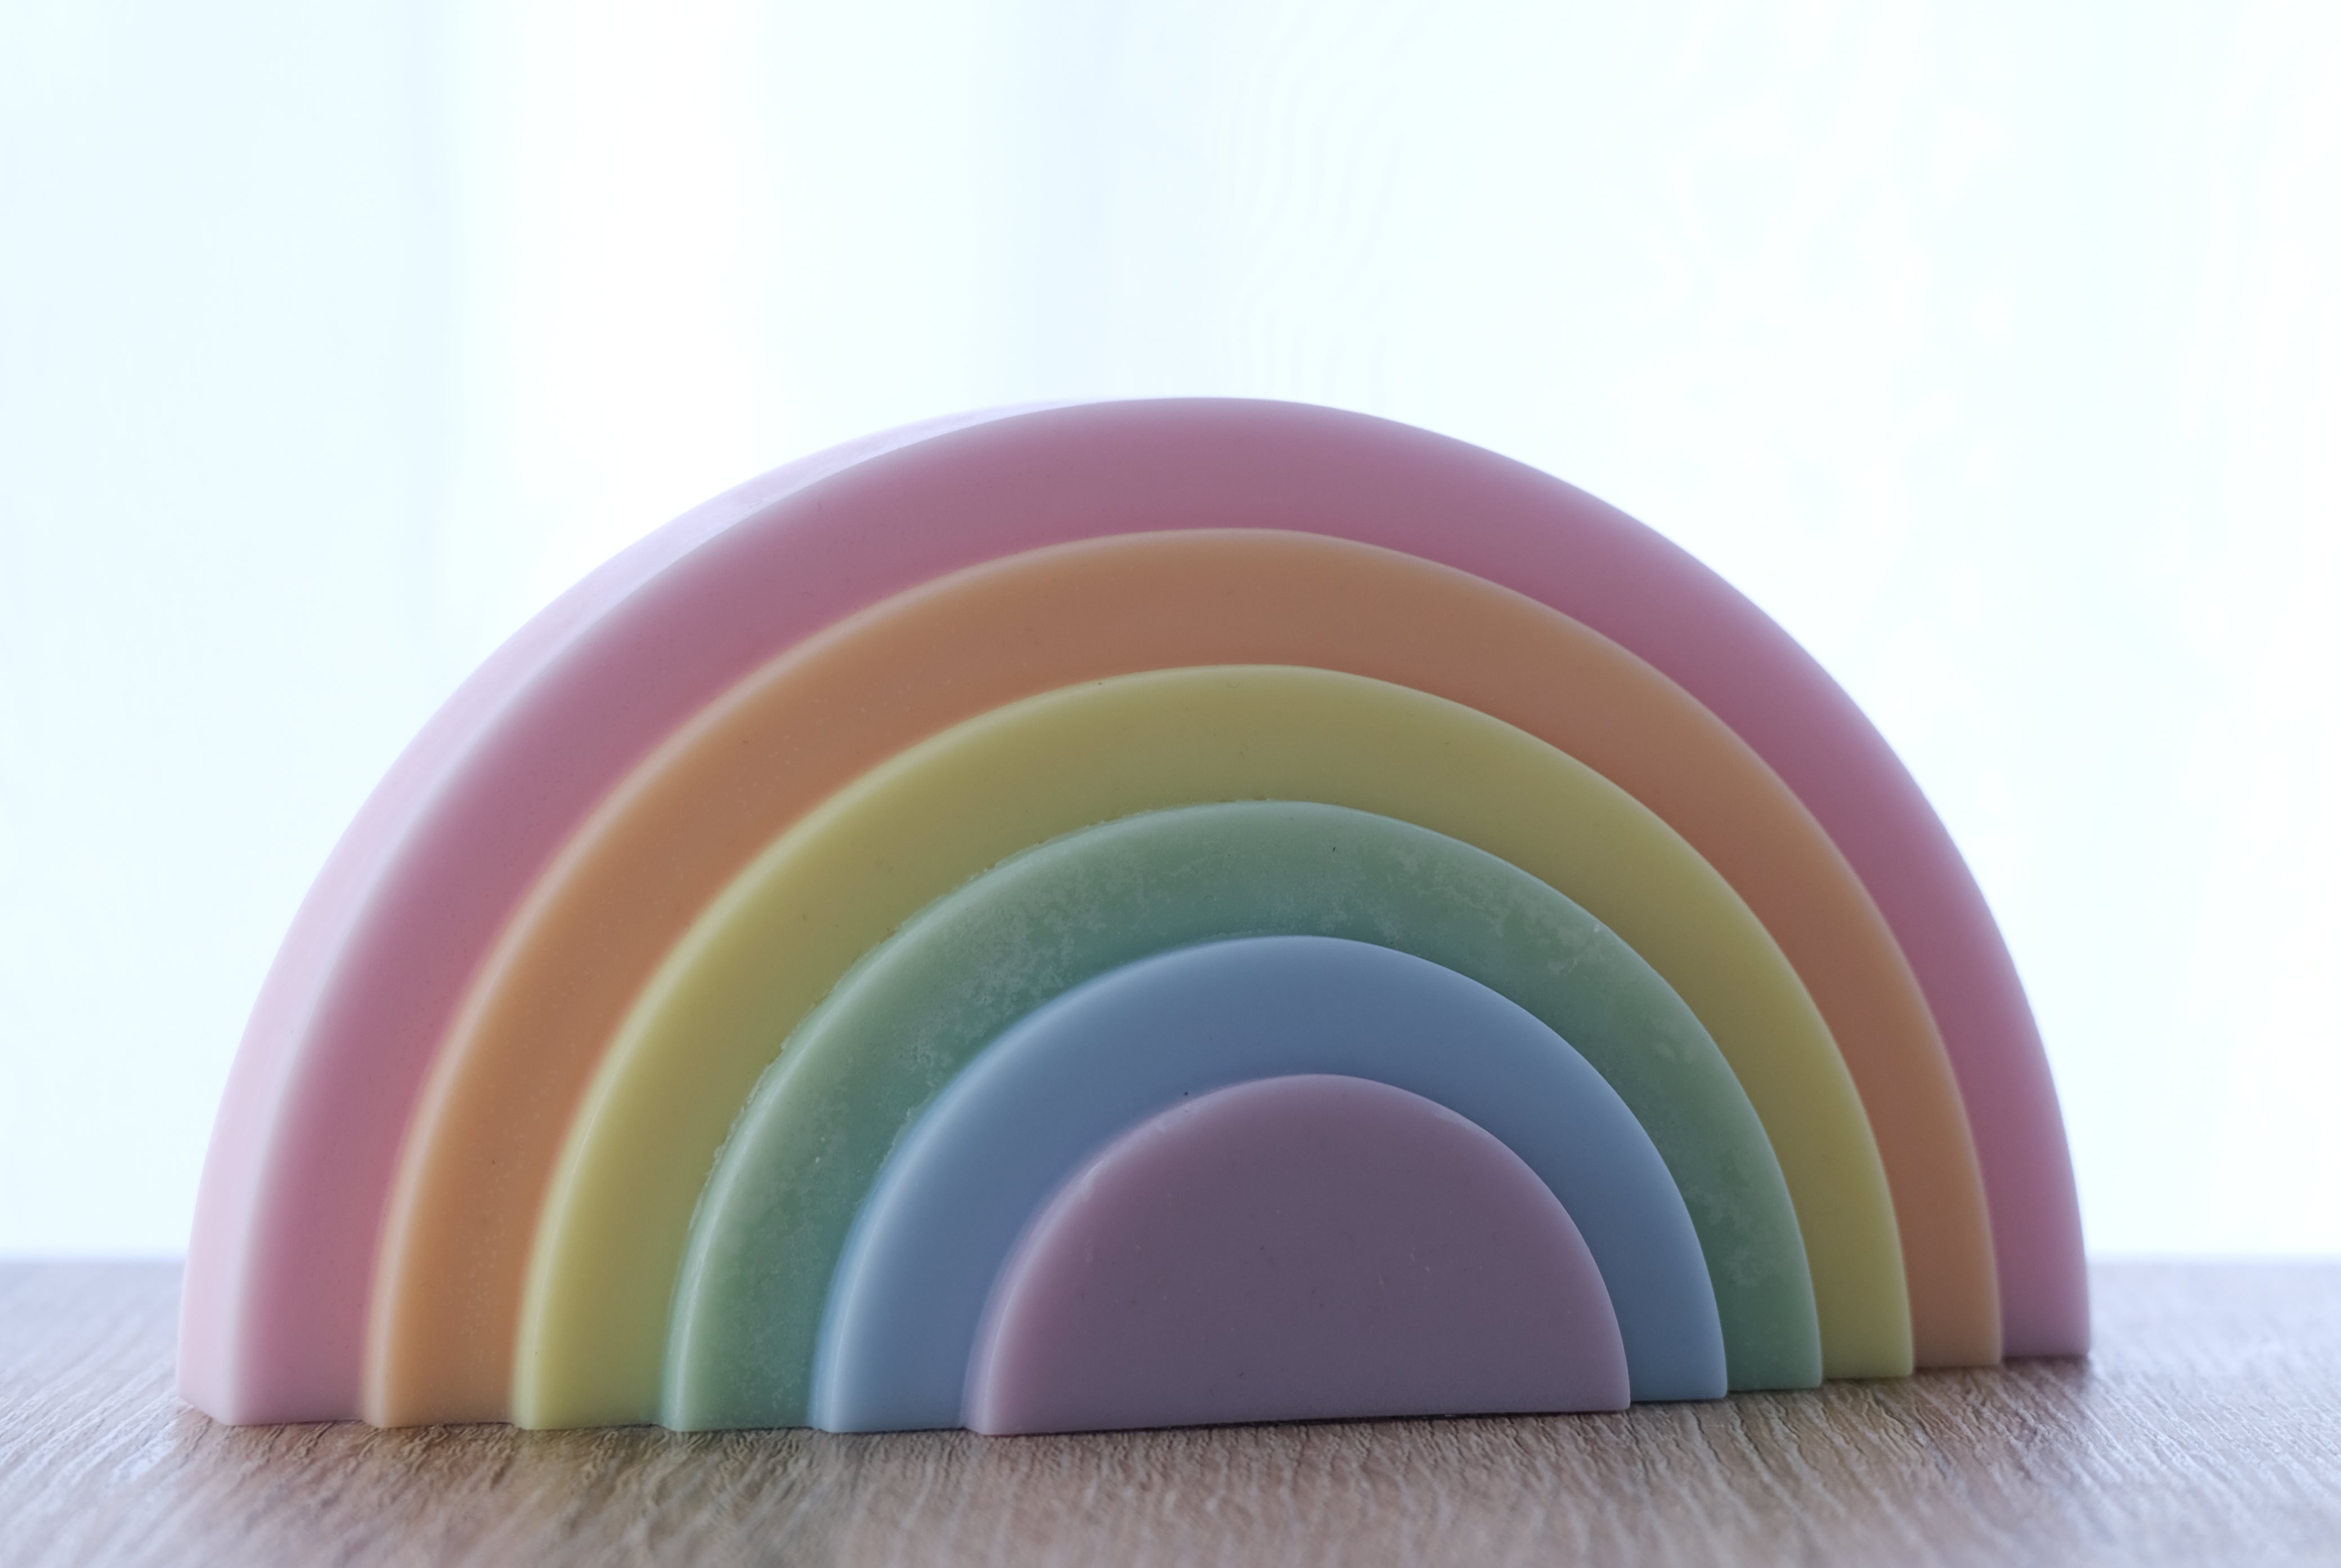 Tiered Rainbow Candle Mould 1 - Silicone Mould, Mold for DIY Candles. Created using candle making kit with cotton candle wicks and candle colour chips. Using soy wax for pillar candles. Sold by Myka Candles Moulds Australia